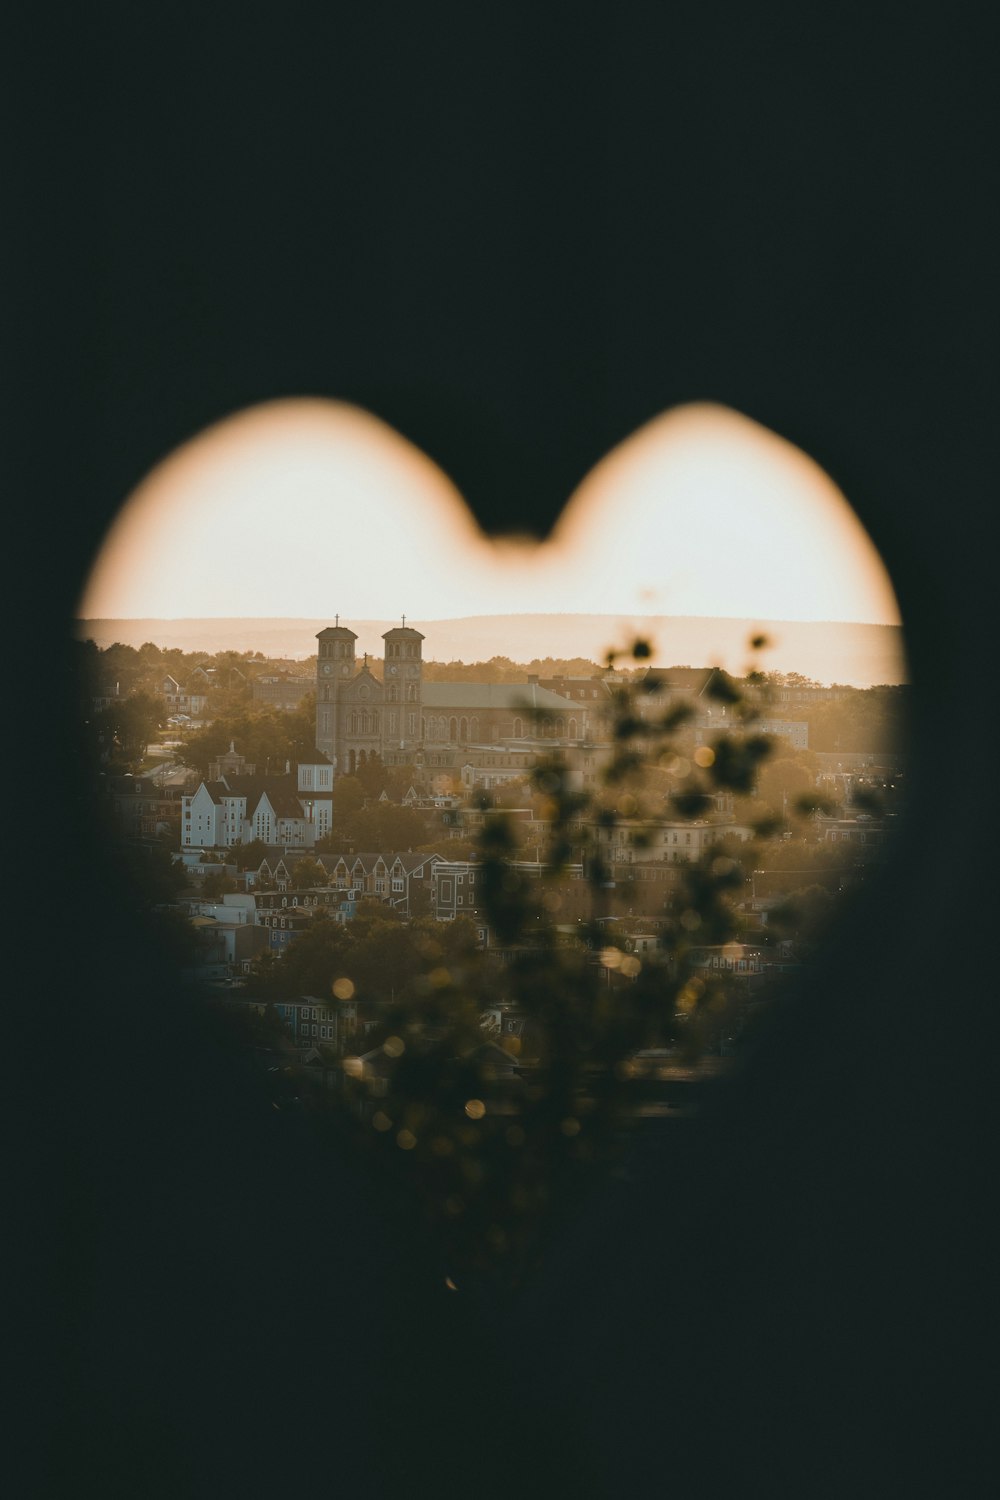 a view of a city through a heart shaped window